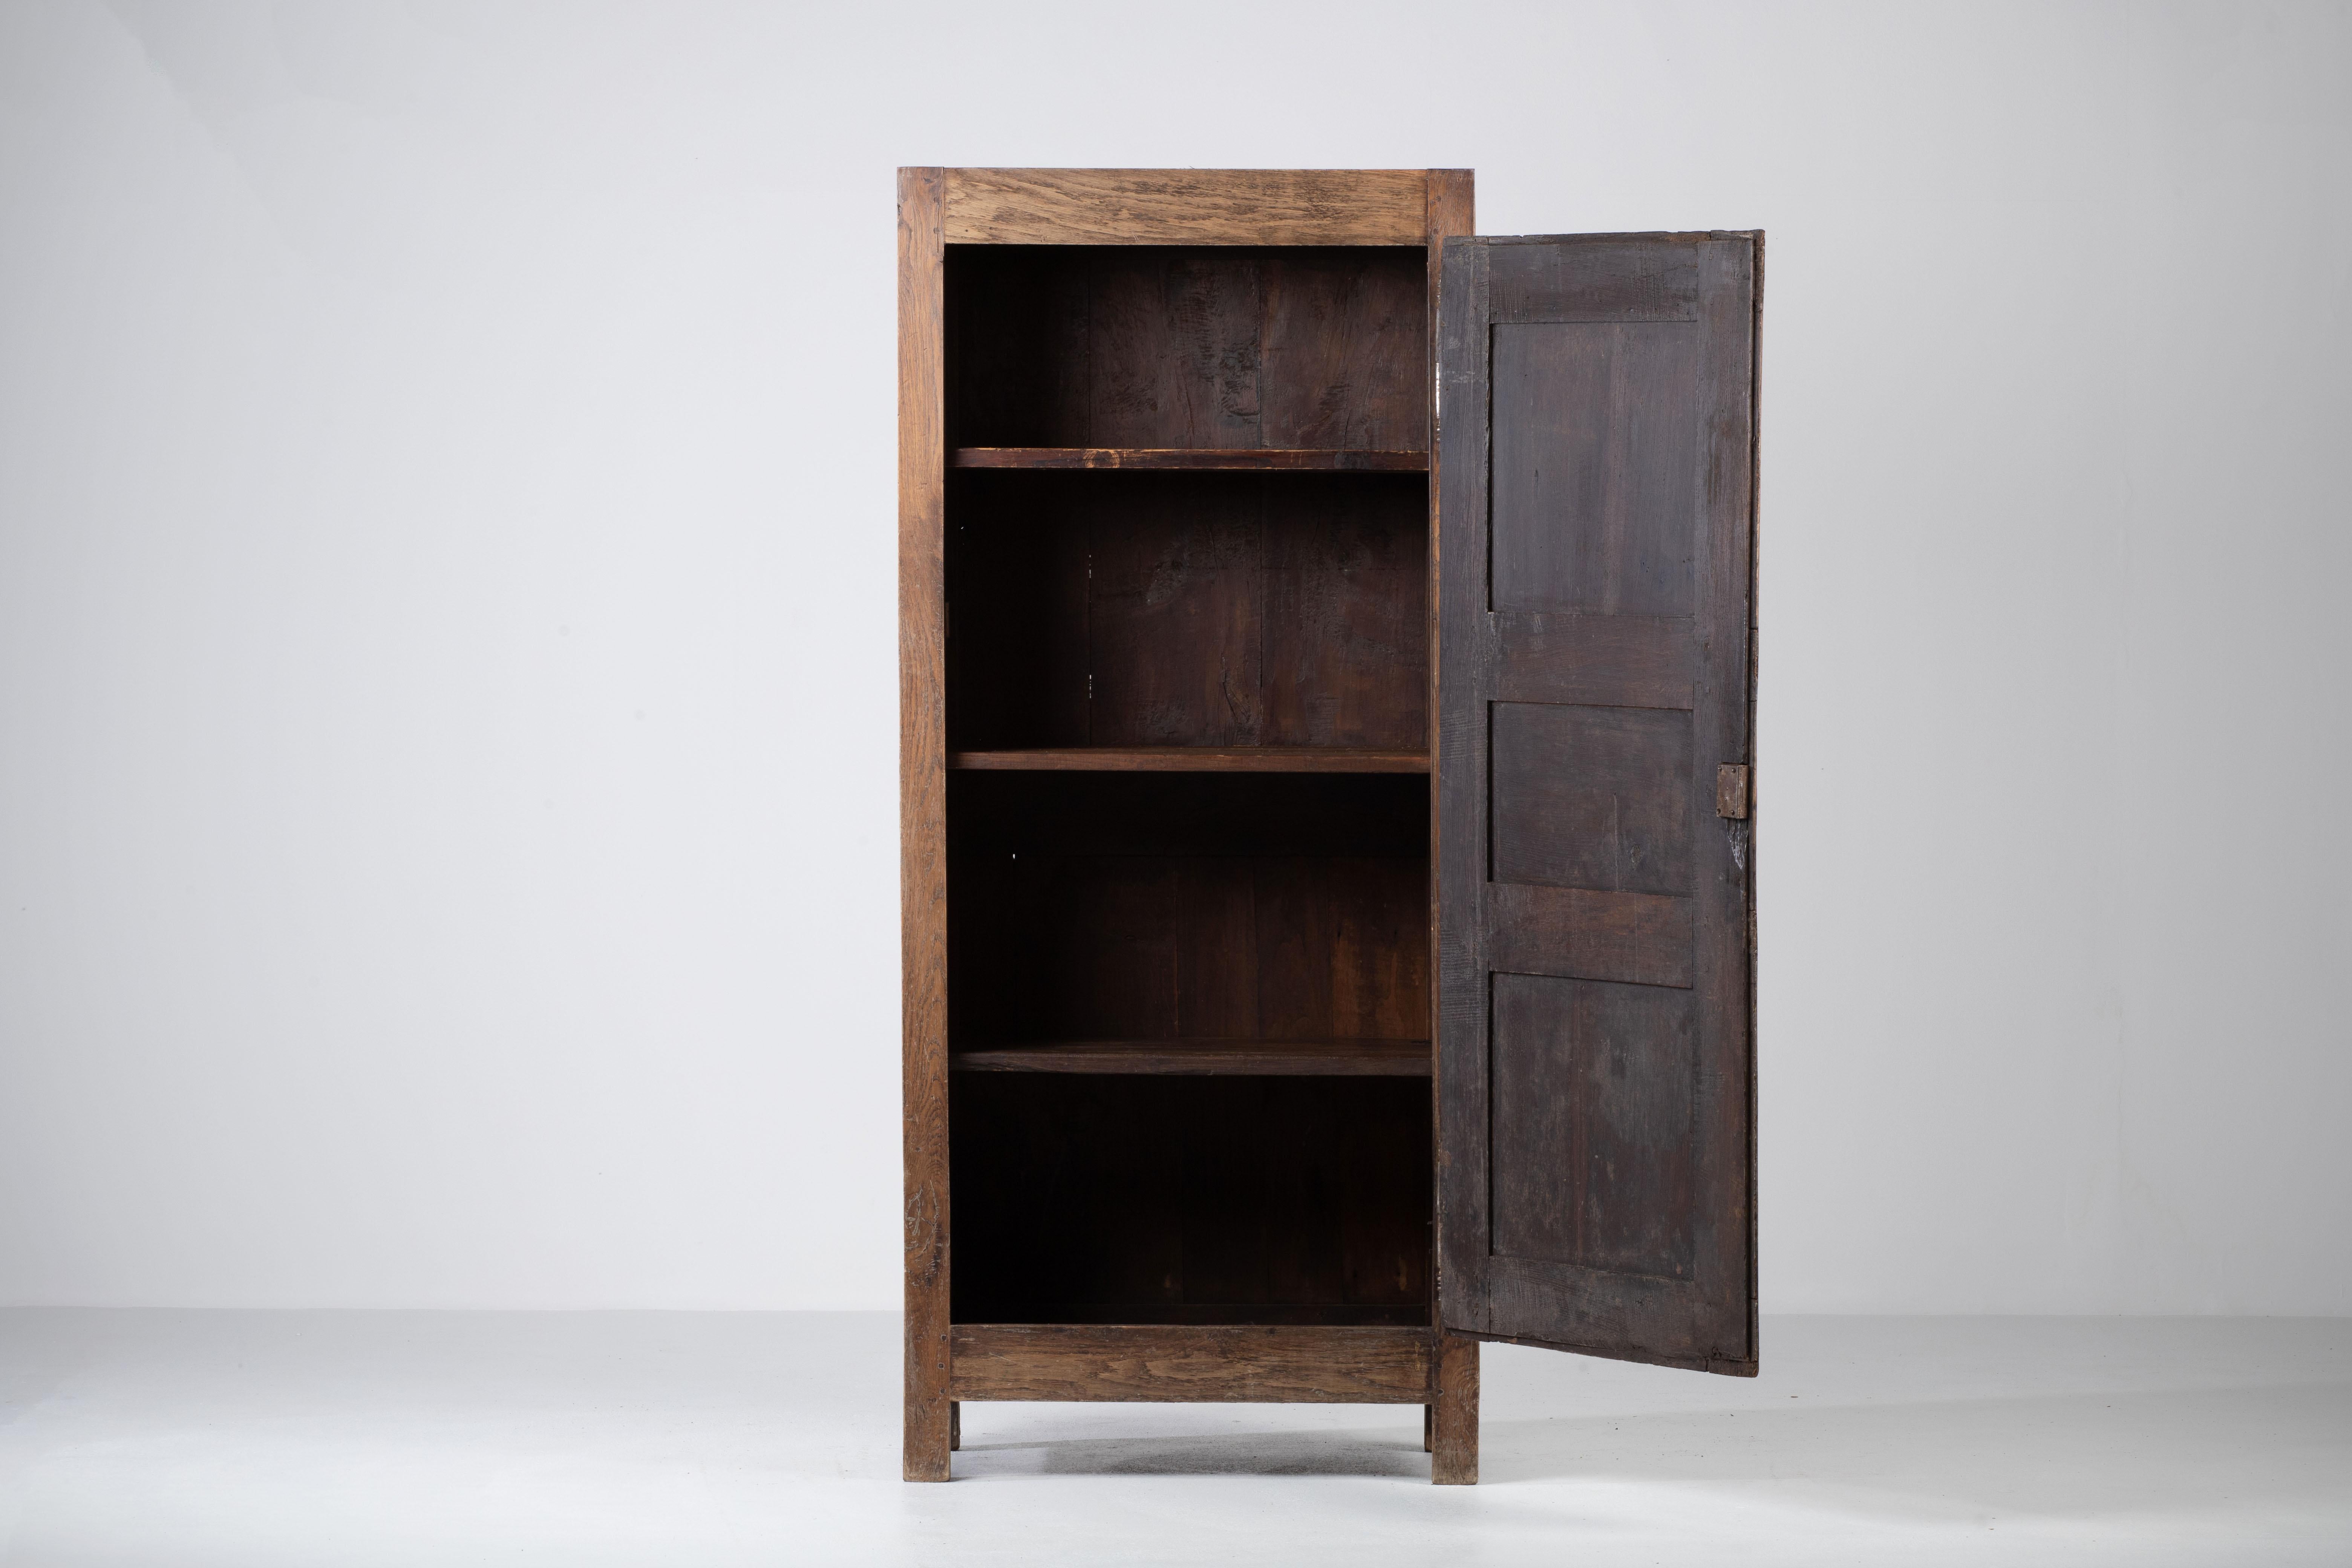 Petite Armoire in solid oak, France 19th century.
France c. 1950.